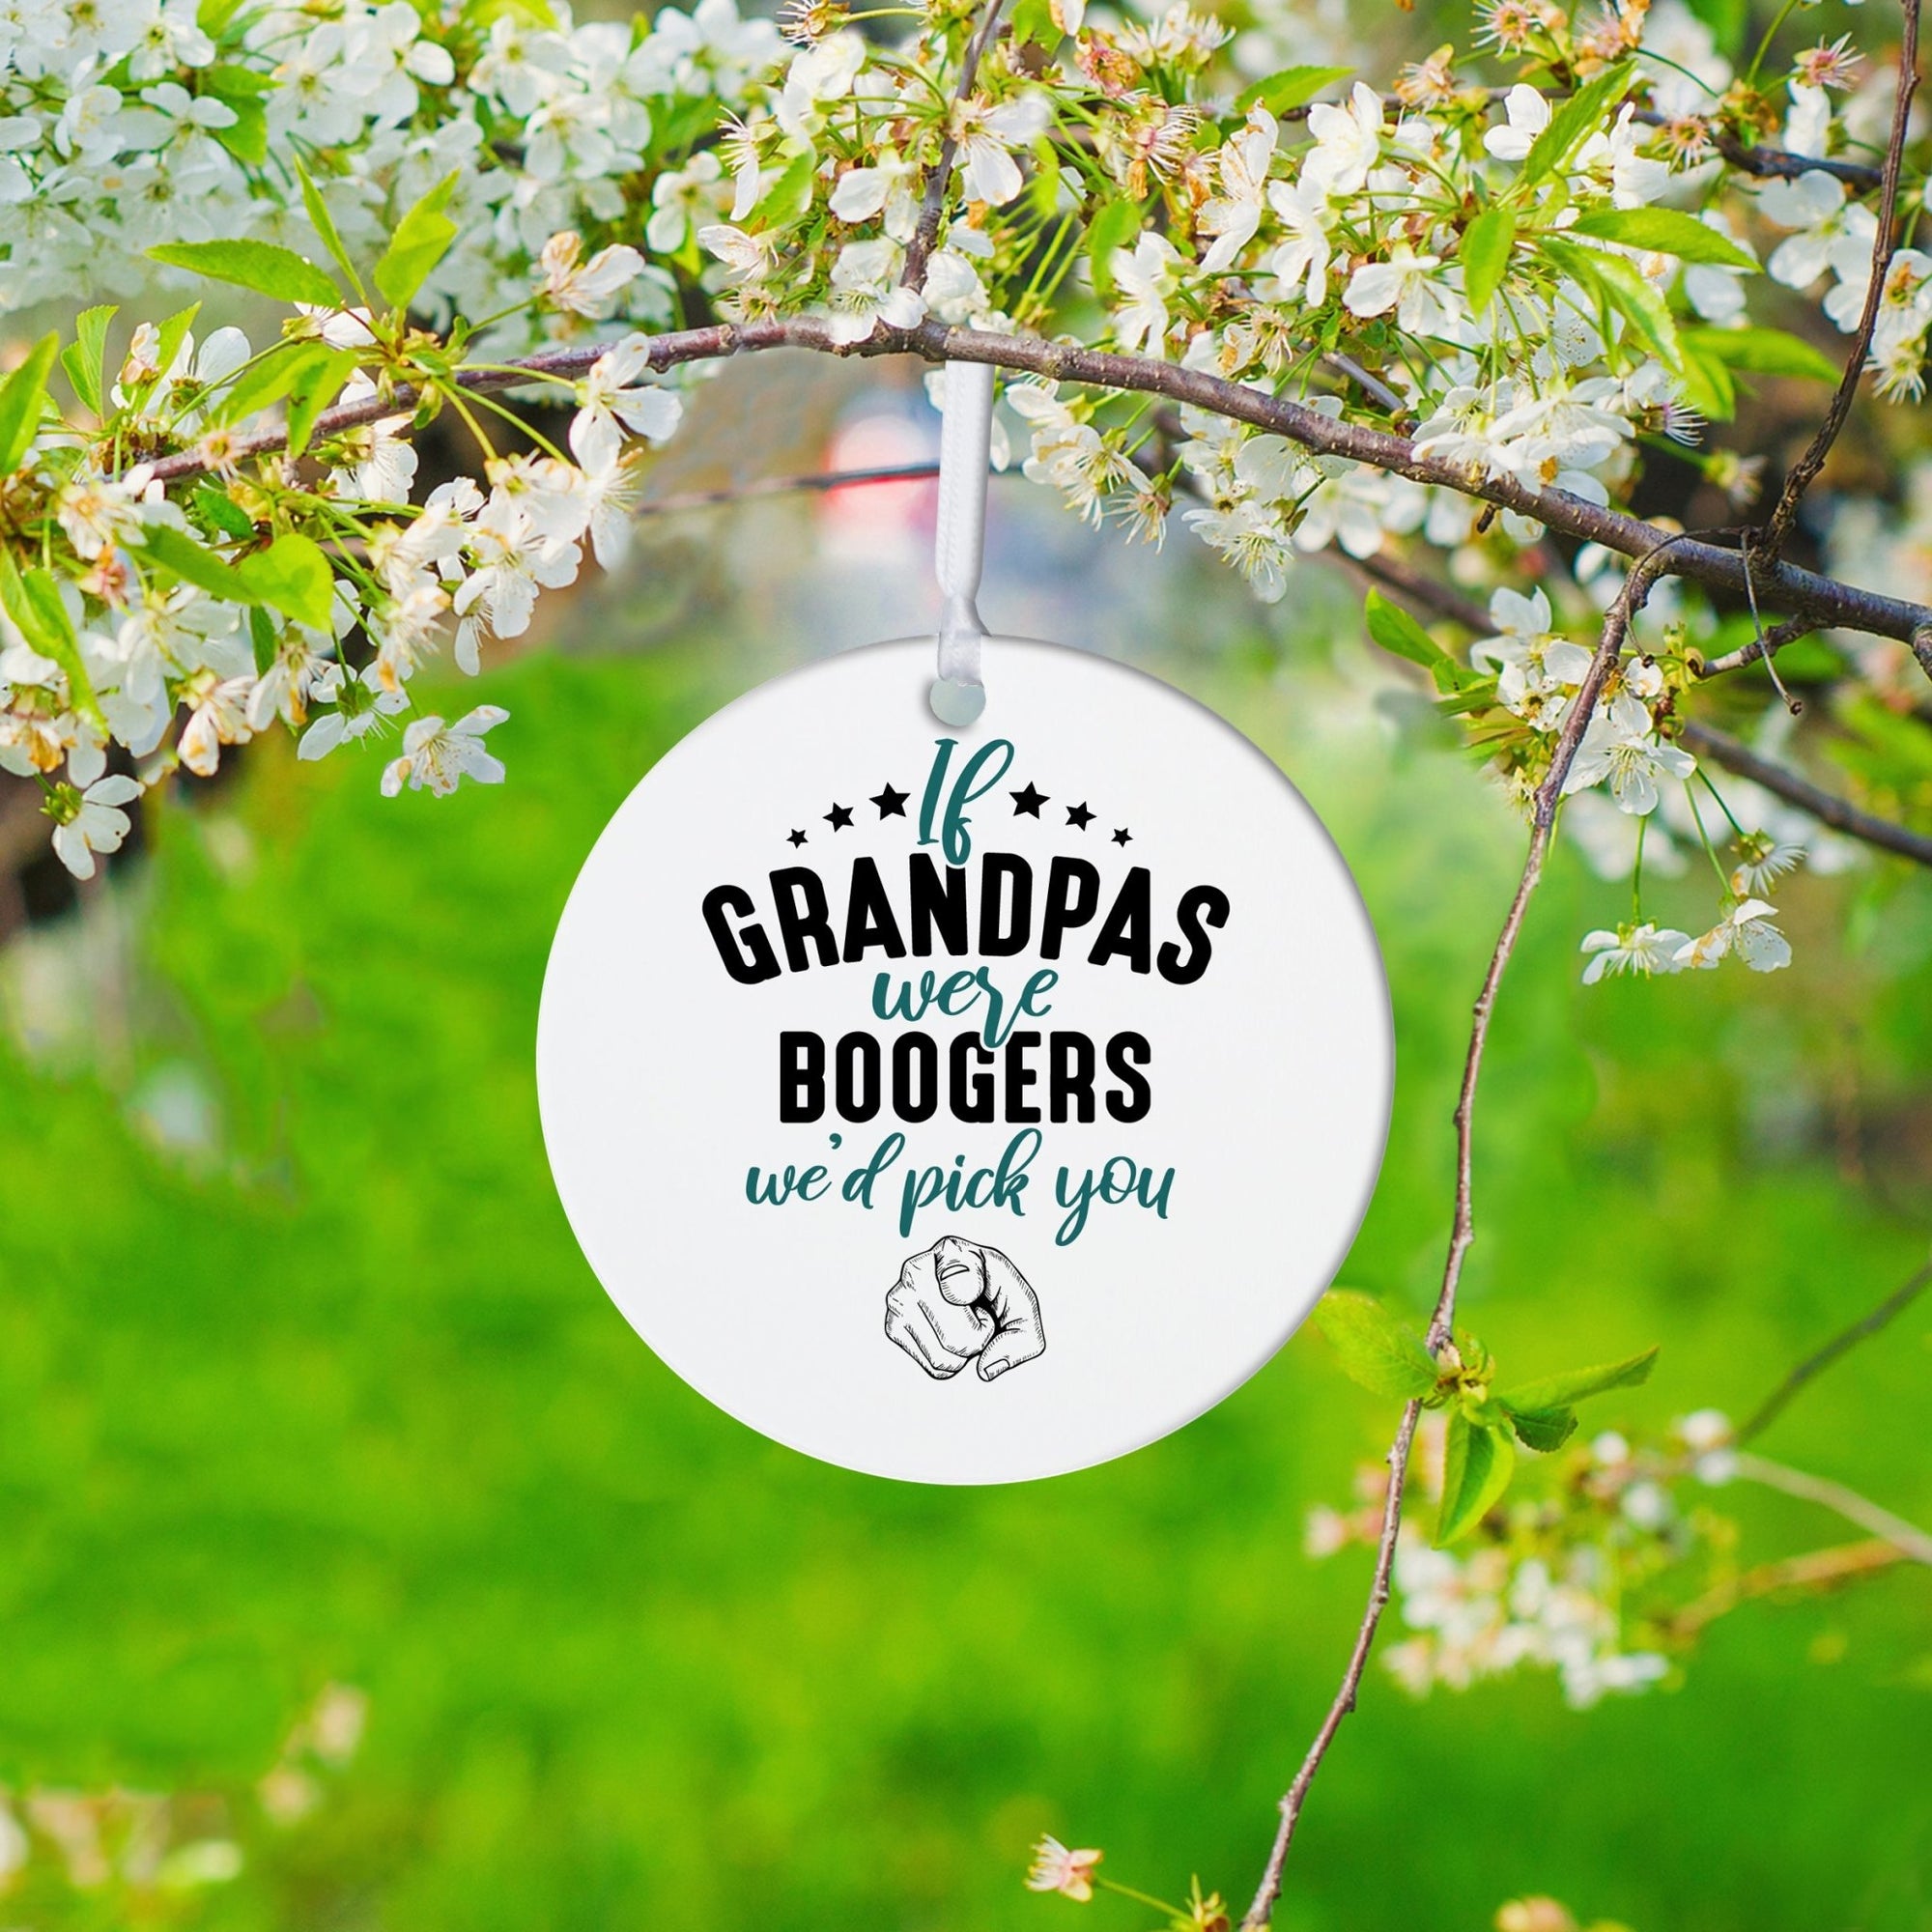 Grandparents White Ornament With Inspirational Message Gift Ideas - If Grandpa Were Boogers We’d Pick You - LifeSong Milestones